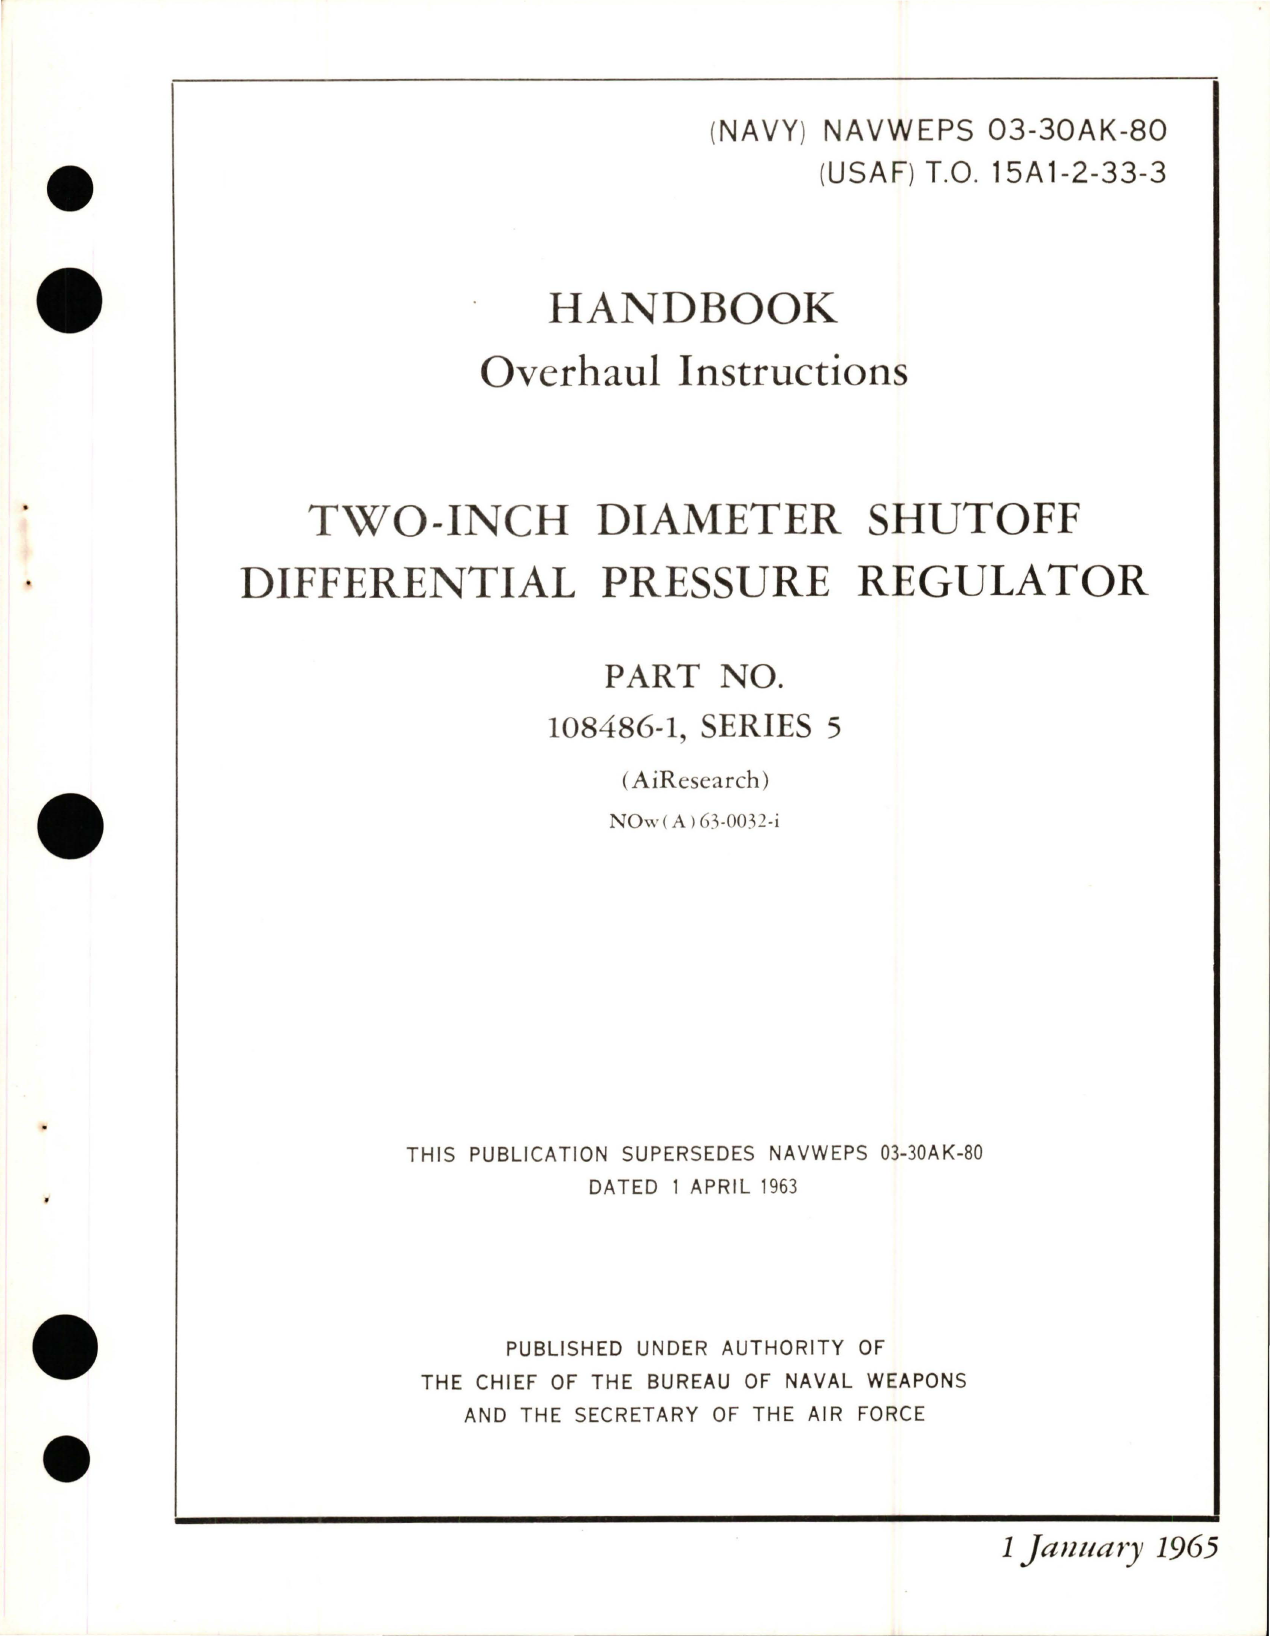 Sample page 1 from AirCorps Library document: Overhaul Instructions for Shutoff Differential Pressure Regulator Part 108486-1 Series 5 